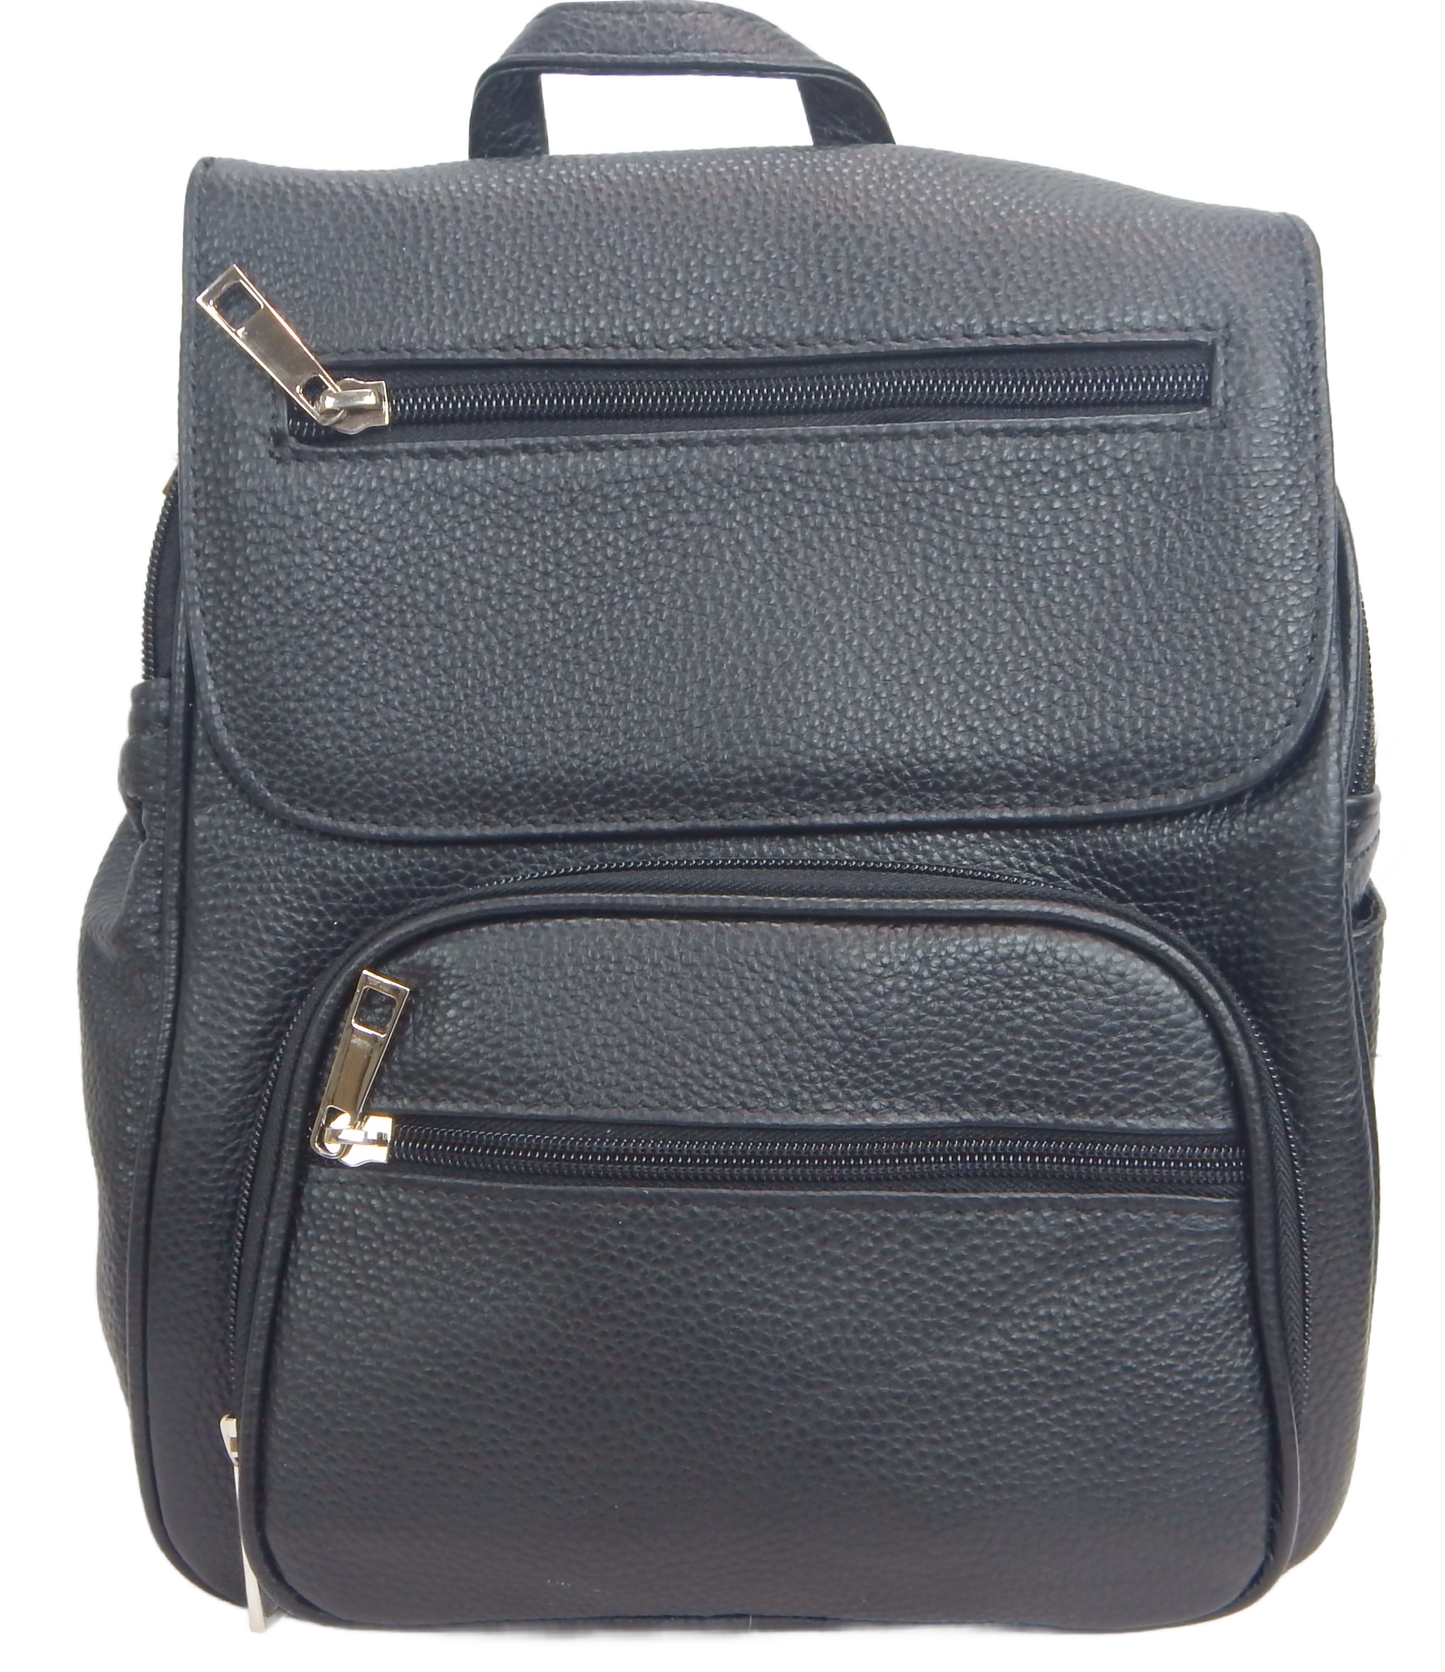 Concealed Carry Backpack with Flap